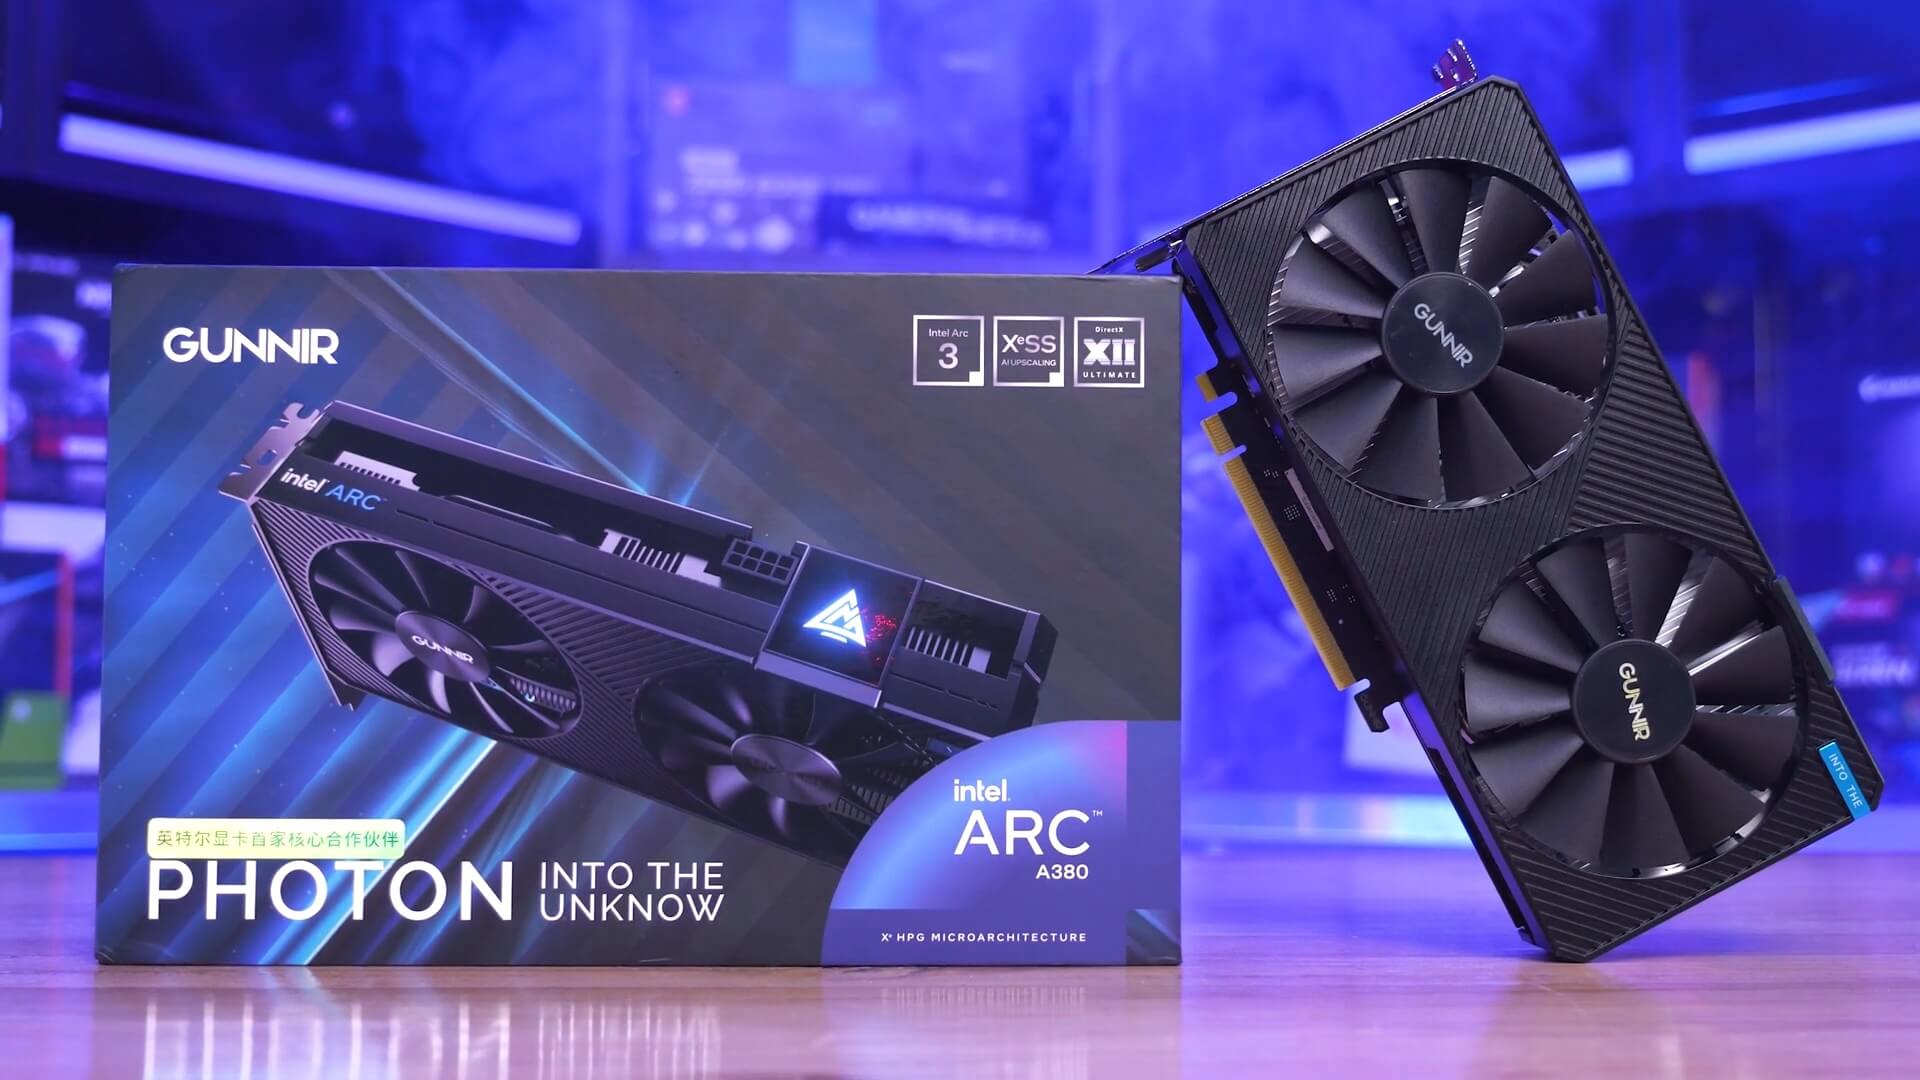 Intel says it isn't abandoning Arc graphics cards, is working on the next generations